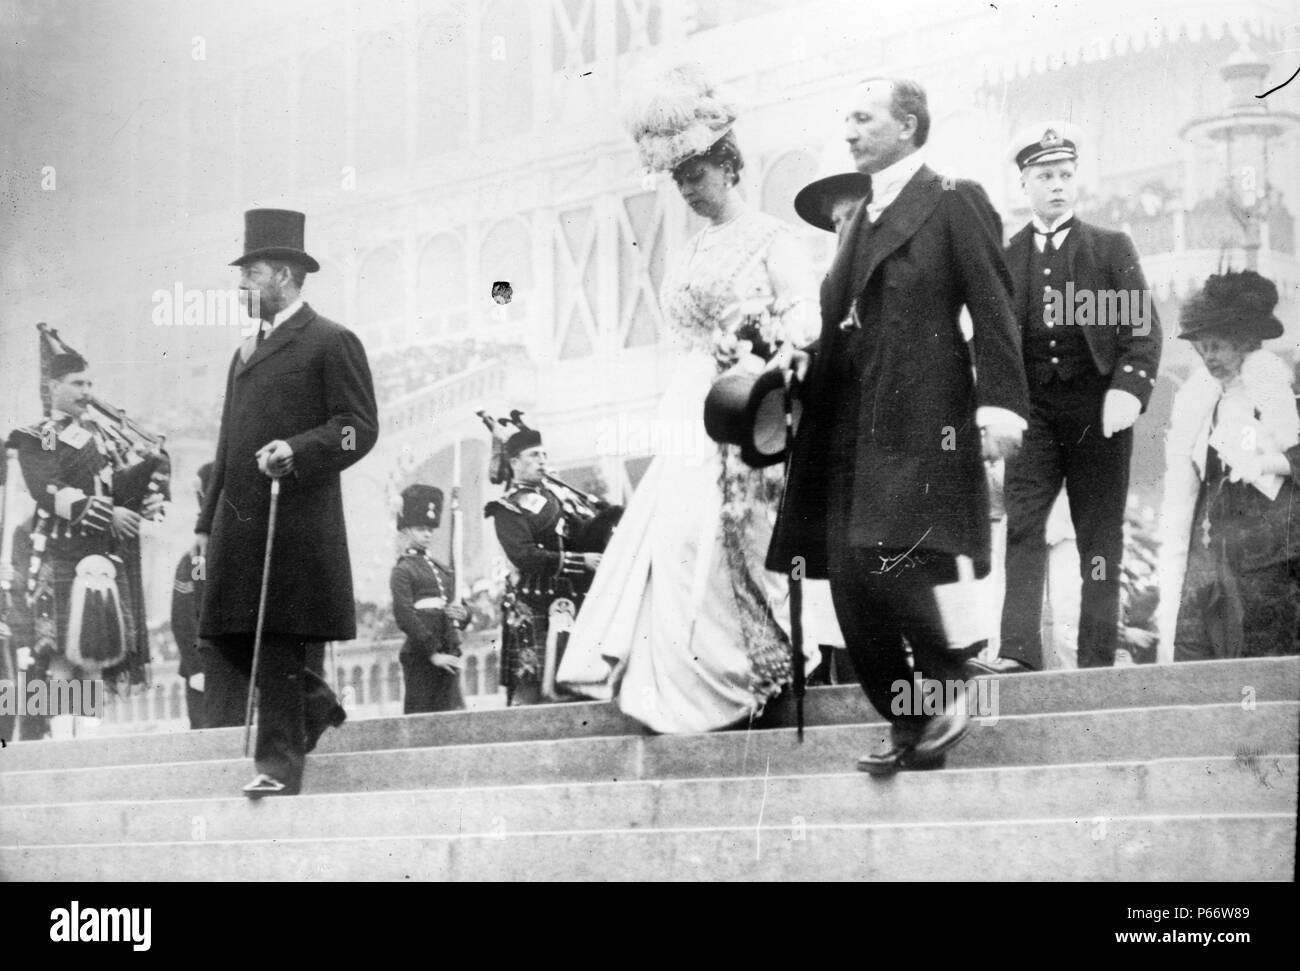 King George V of the United Kingdom, Queen Mary and the Prince of Wales (George VI) at the opening of the Festival of Empire at the Crystal Palace, London, May 12, 1911 Stock Photo